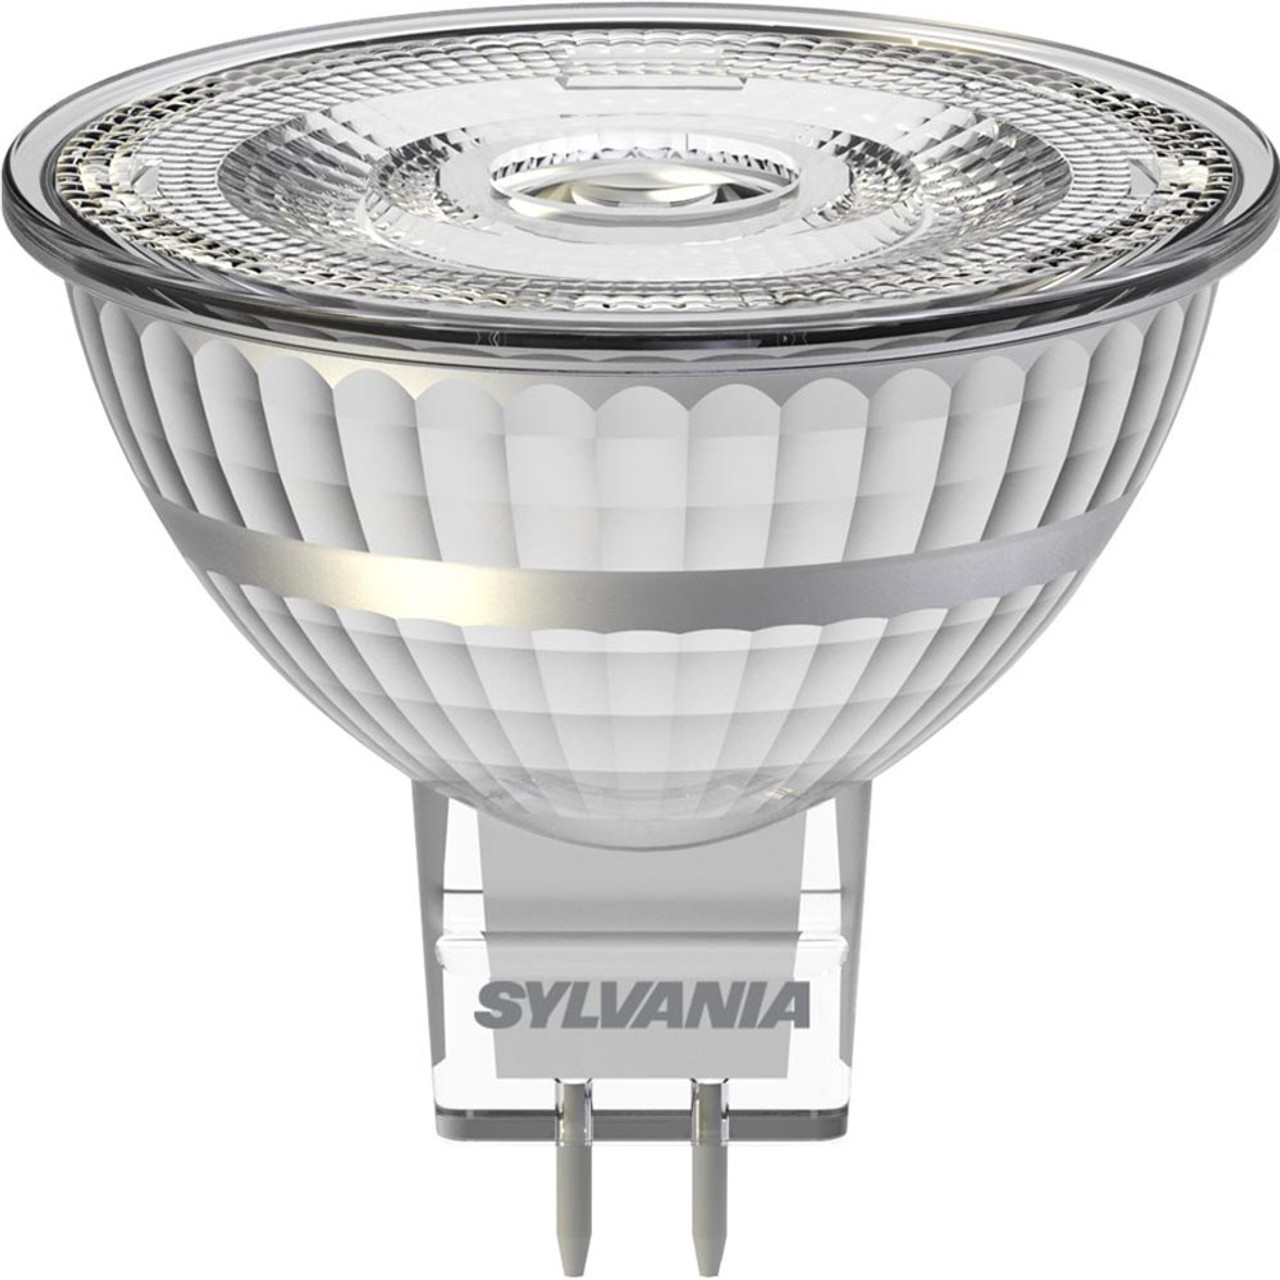 RefLED Superia LED MR16 5.8W (40W) Warm White 36 Degrees Dimmable